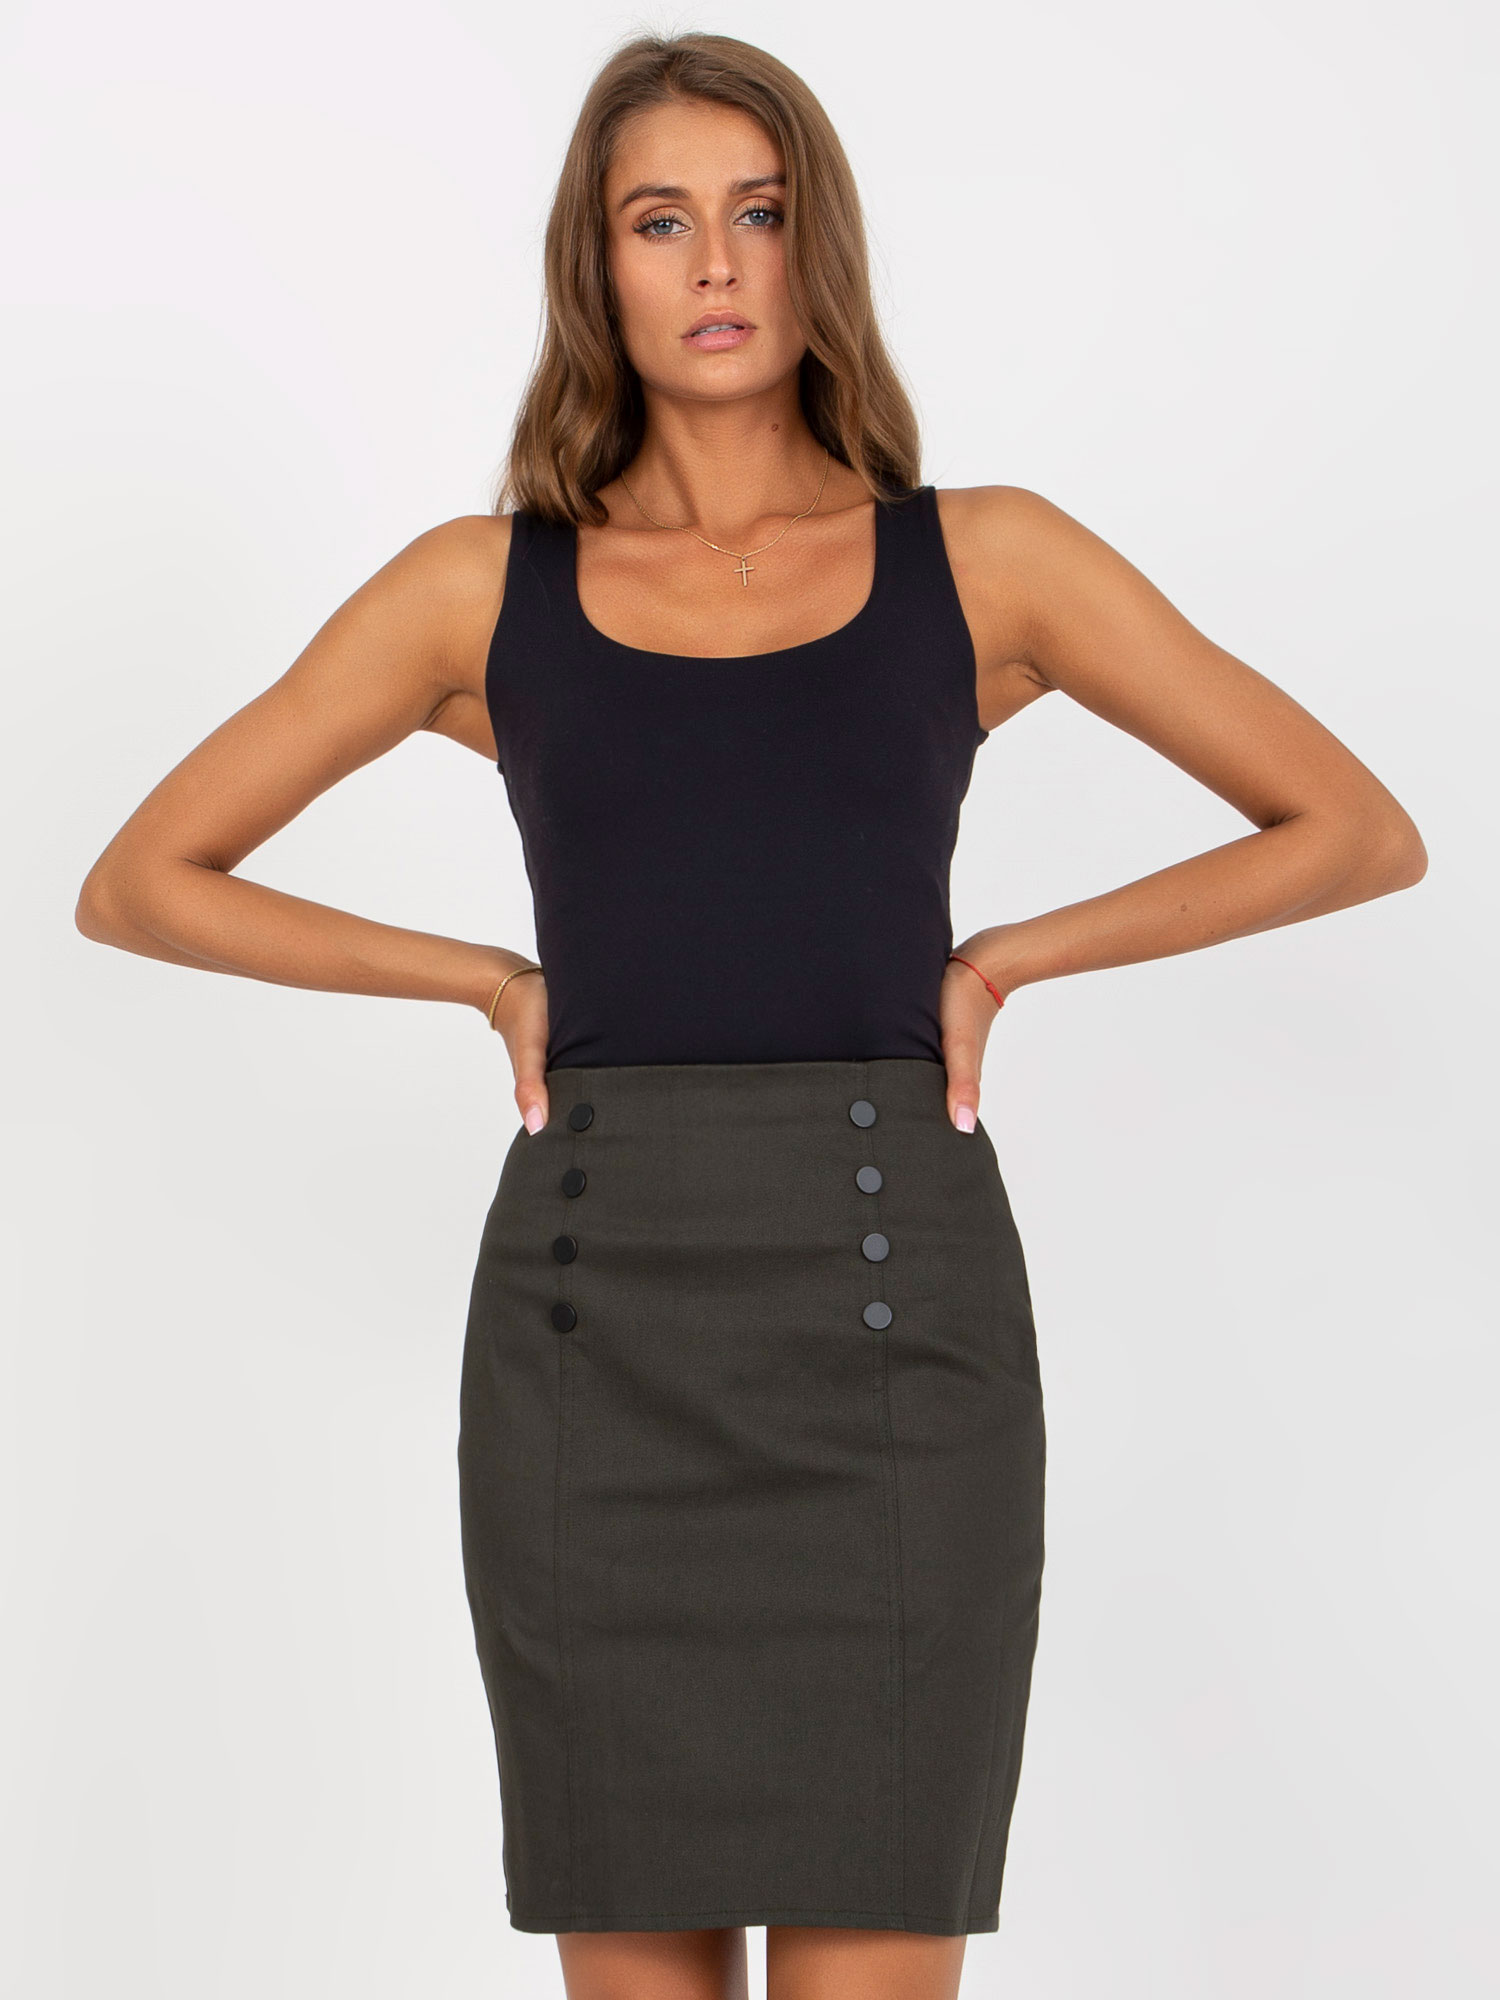 Khaki pencil skirt with buttons